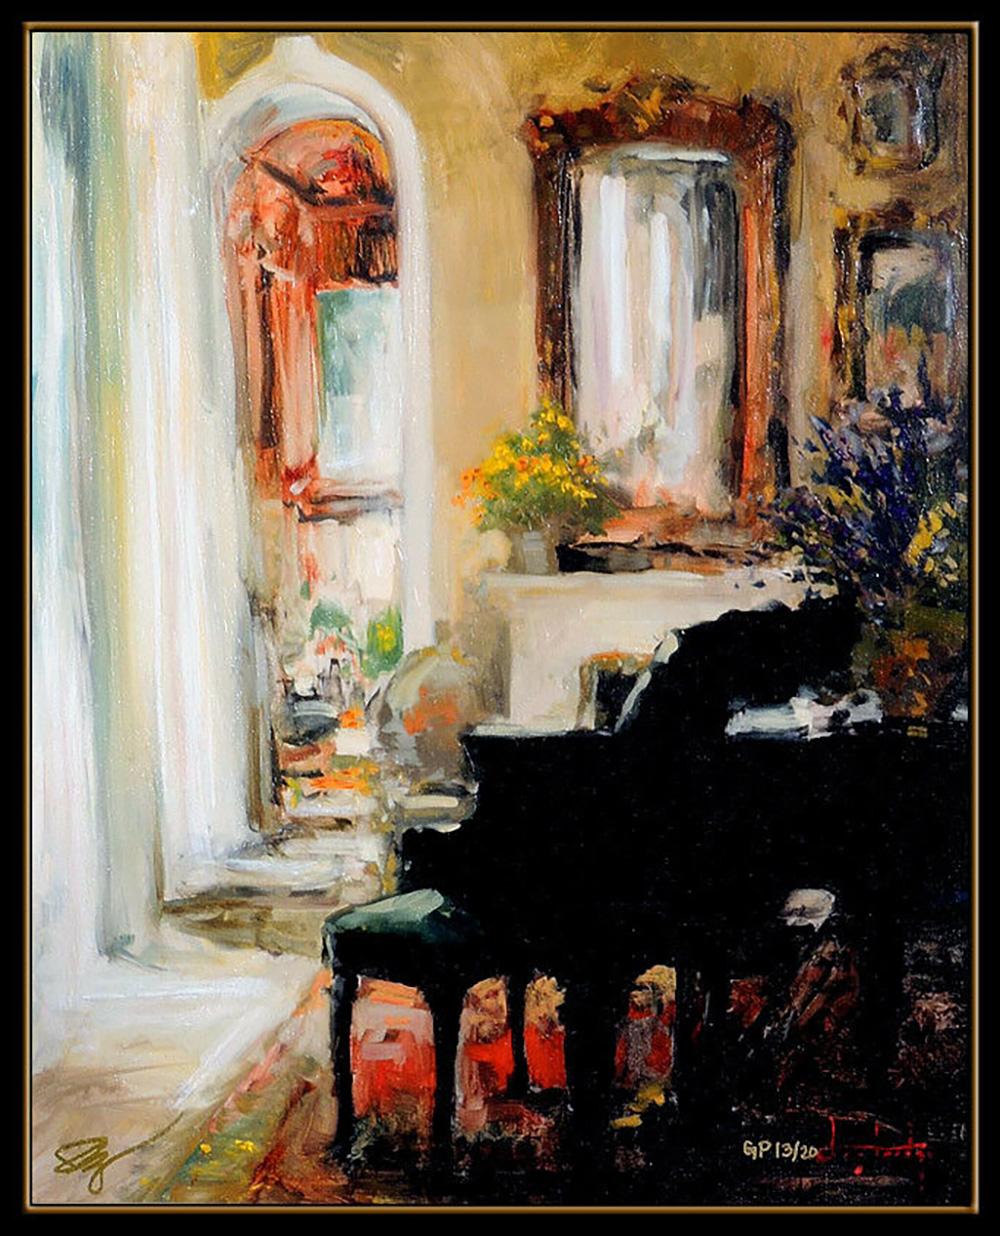 Artist: Stephen Shortridge
Title: Music For A Summer Breeze
Medium: Giclee on Canvas
Year: 2012
Edition Number: Edition of 20 (13 of 20)
Artwork Size: 20 x 16 Unframed
Frame Size: 27 x 23 Framed
